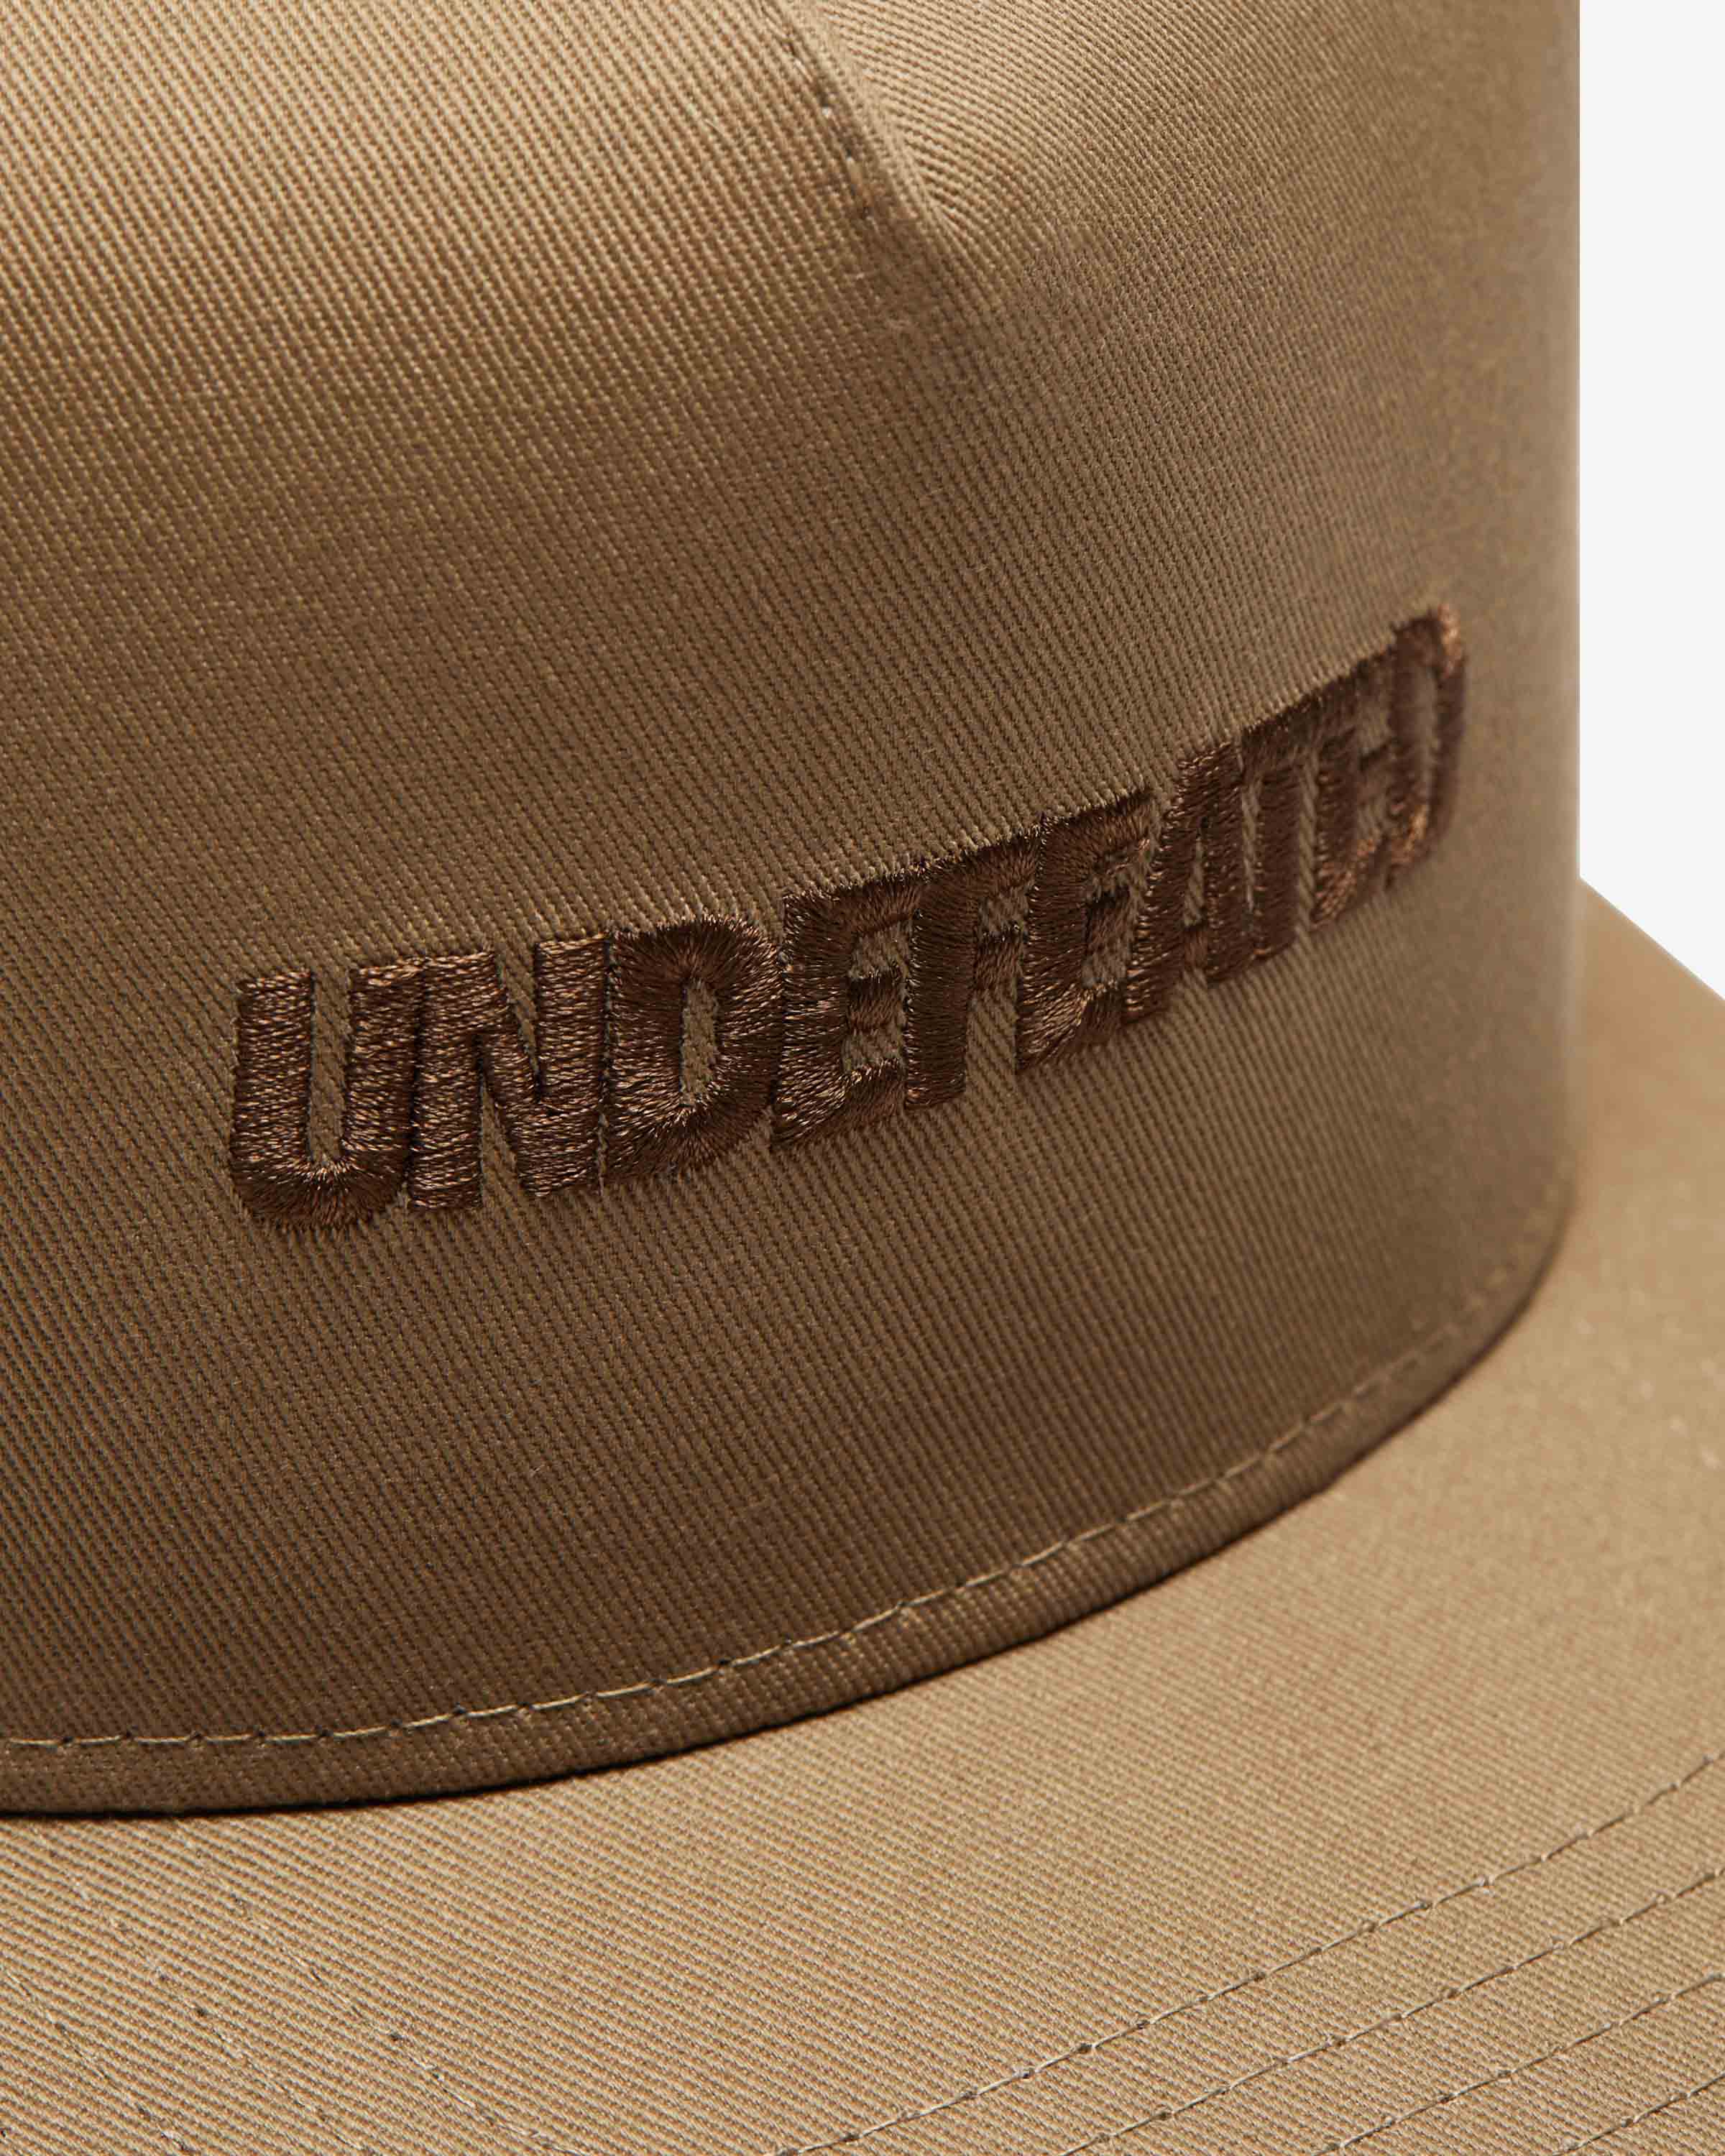 UNDEFEATED LOGO TRUCKER - TAUPE